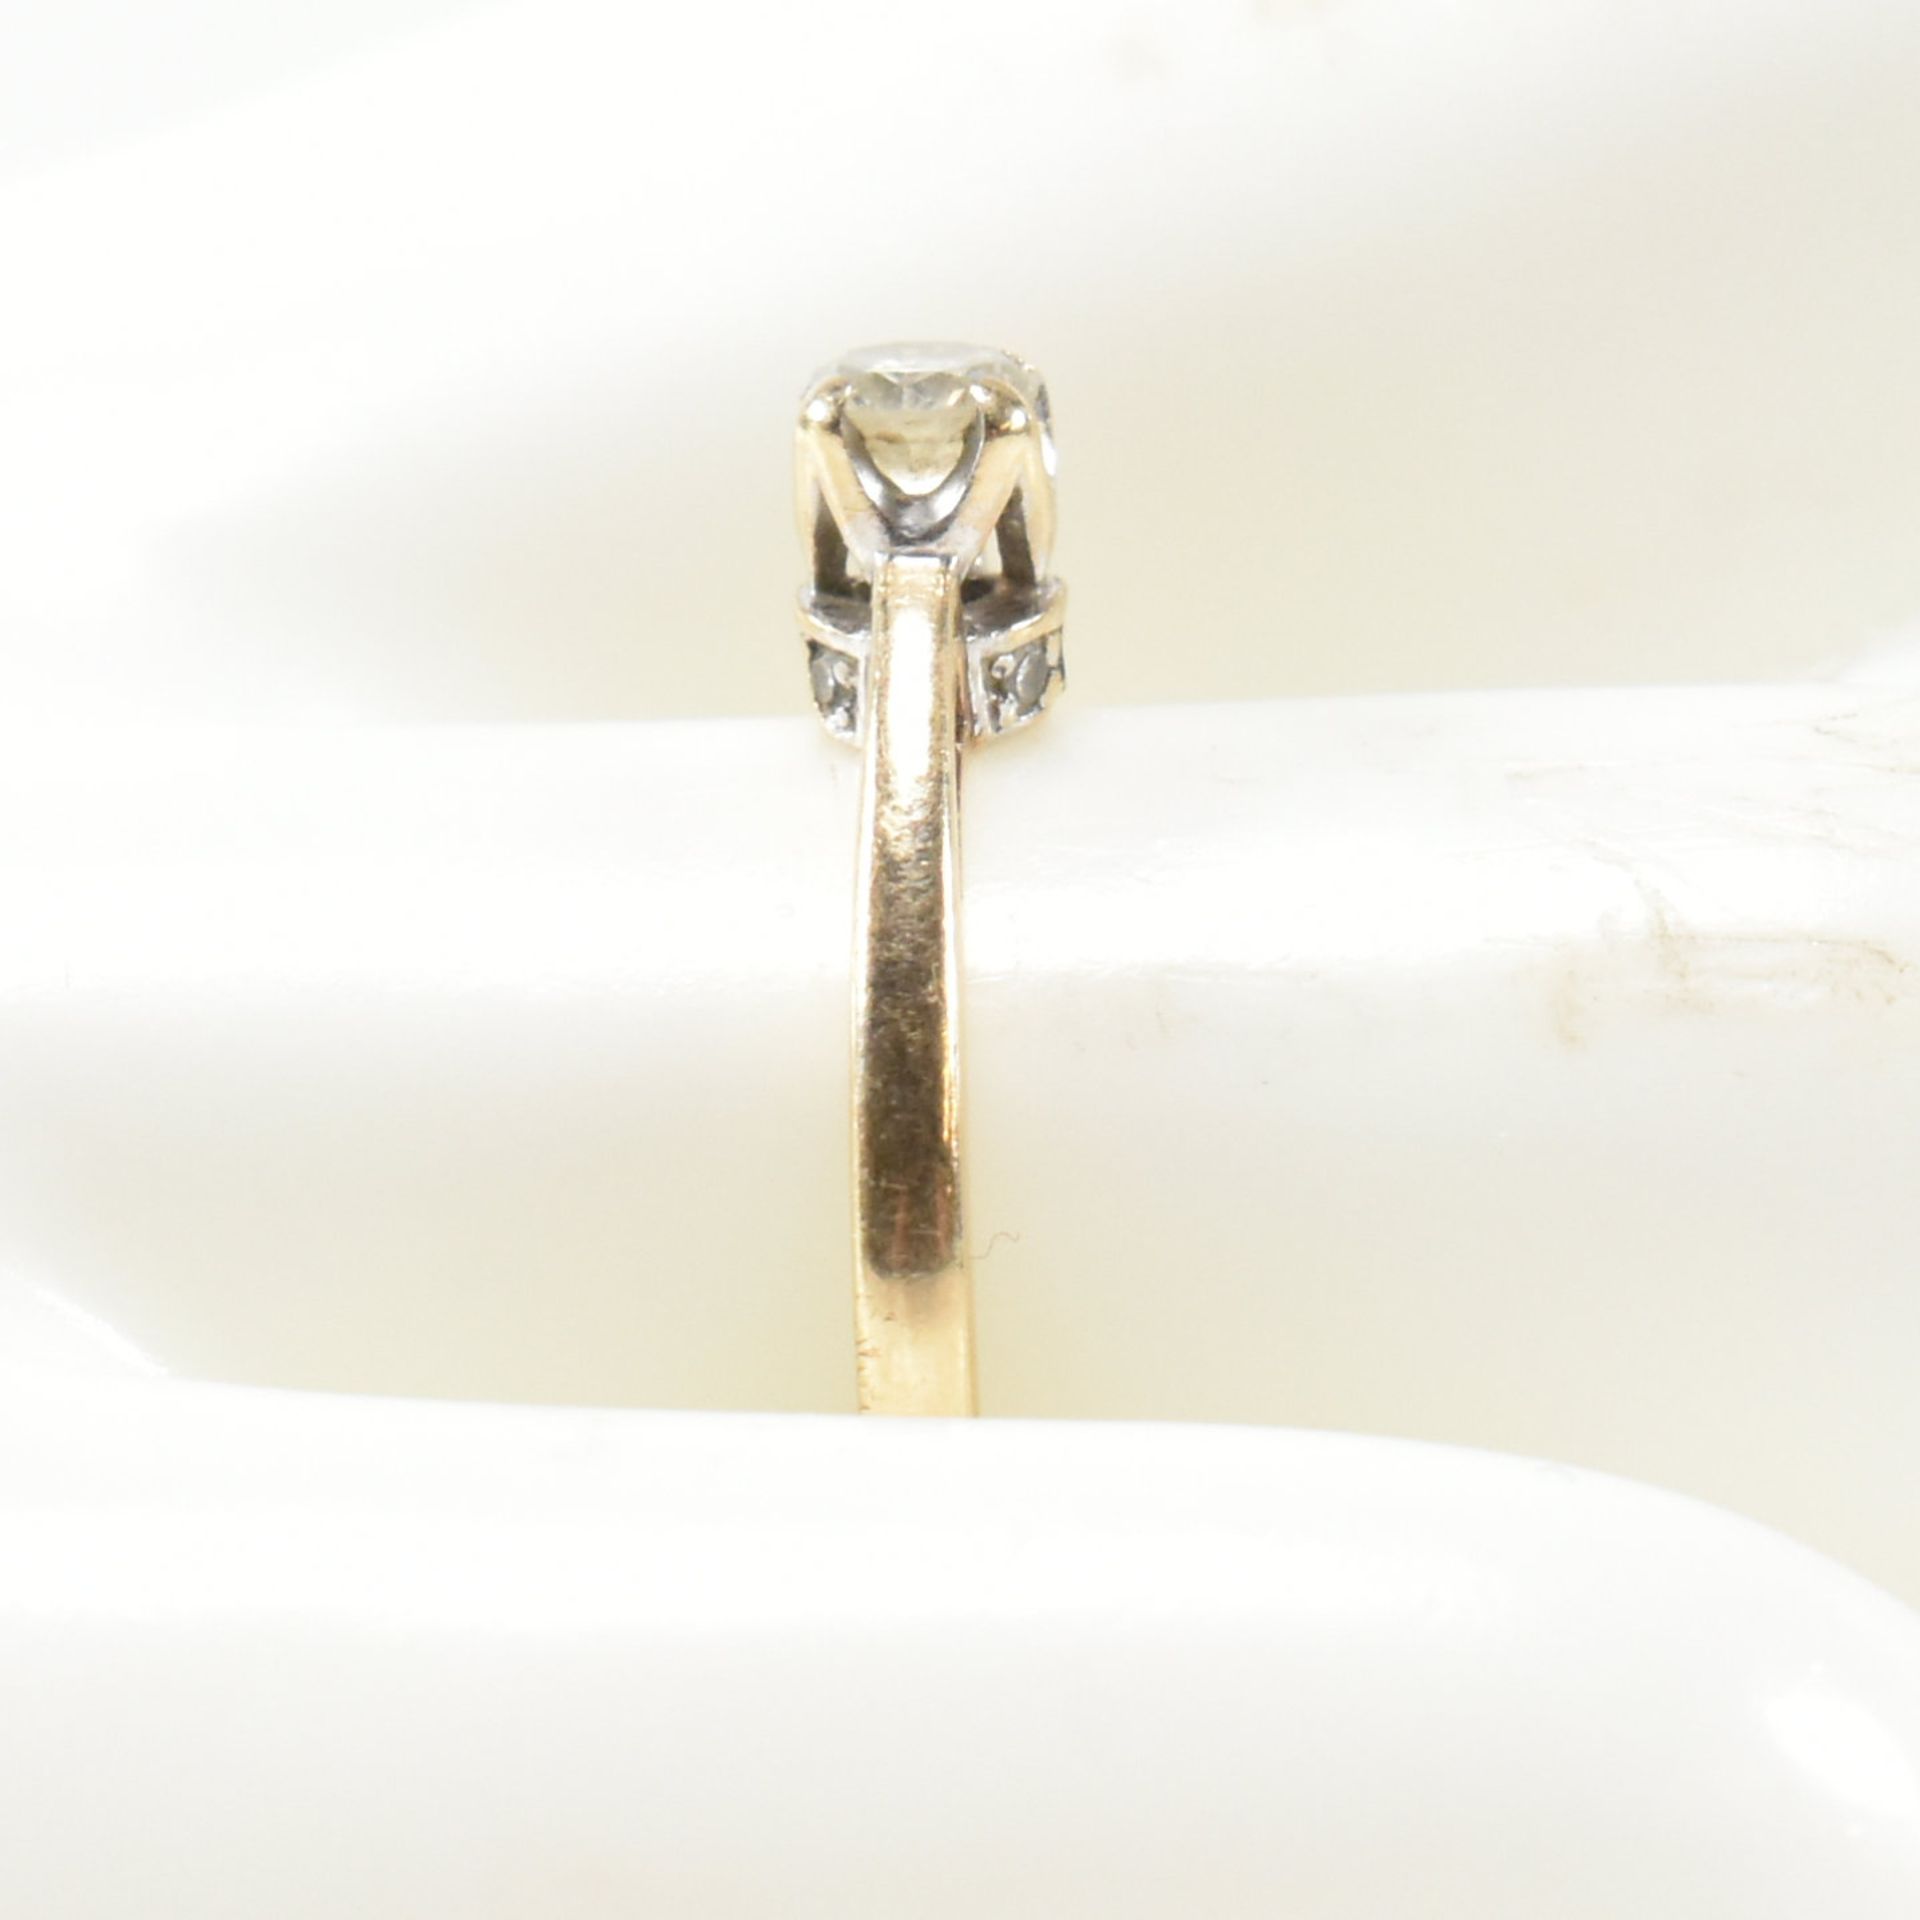 HALLMARKED 9CT GOLD & DIAMOND SOLITAIRE RING - Image 7 of 9